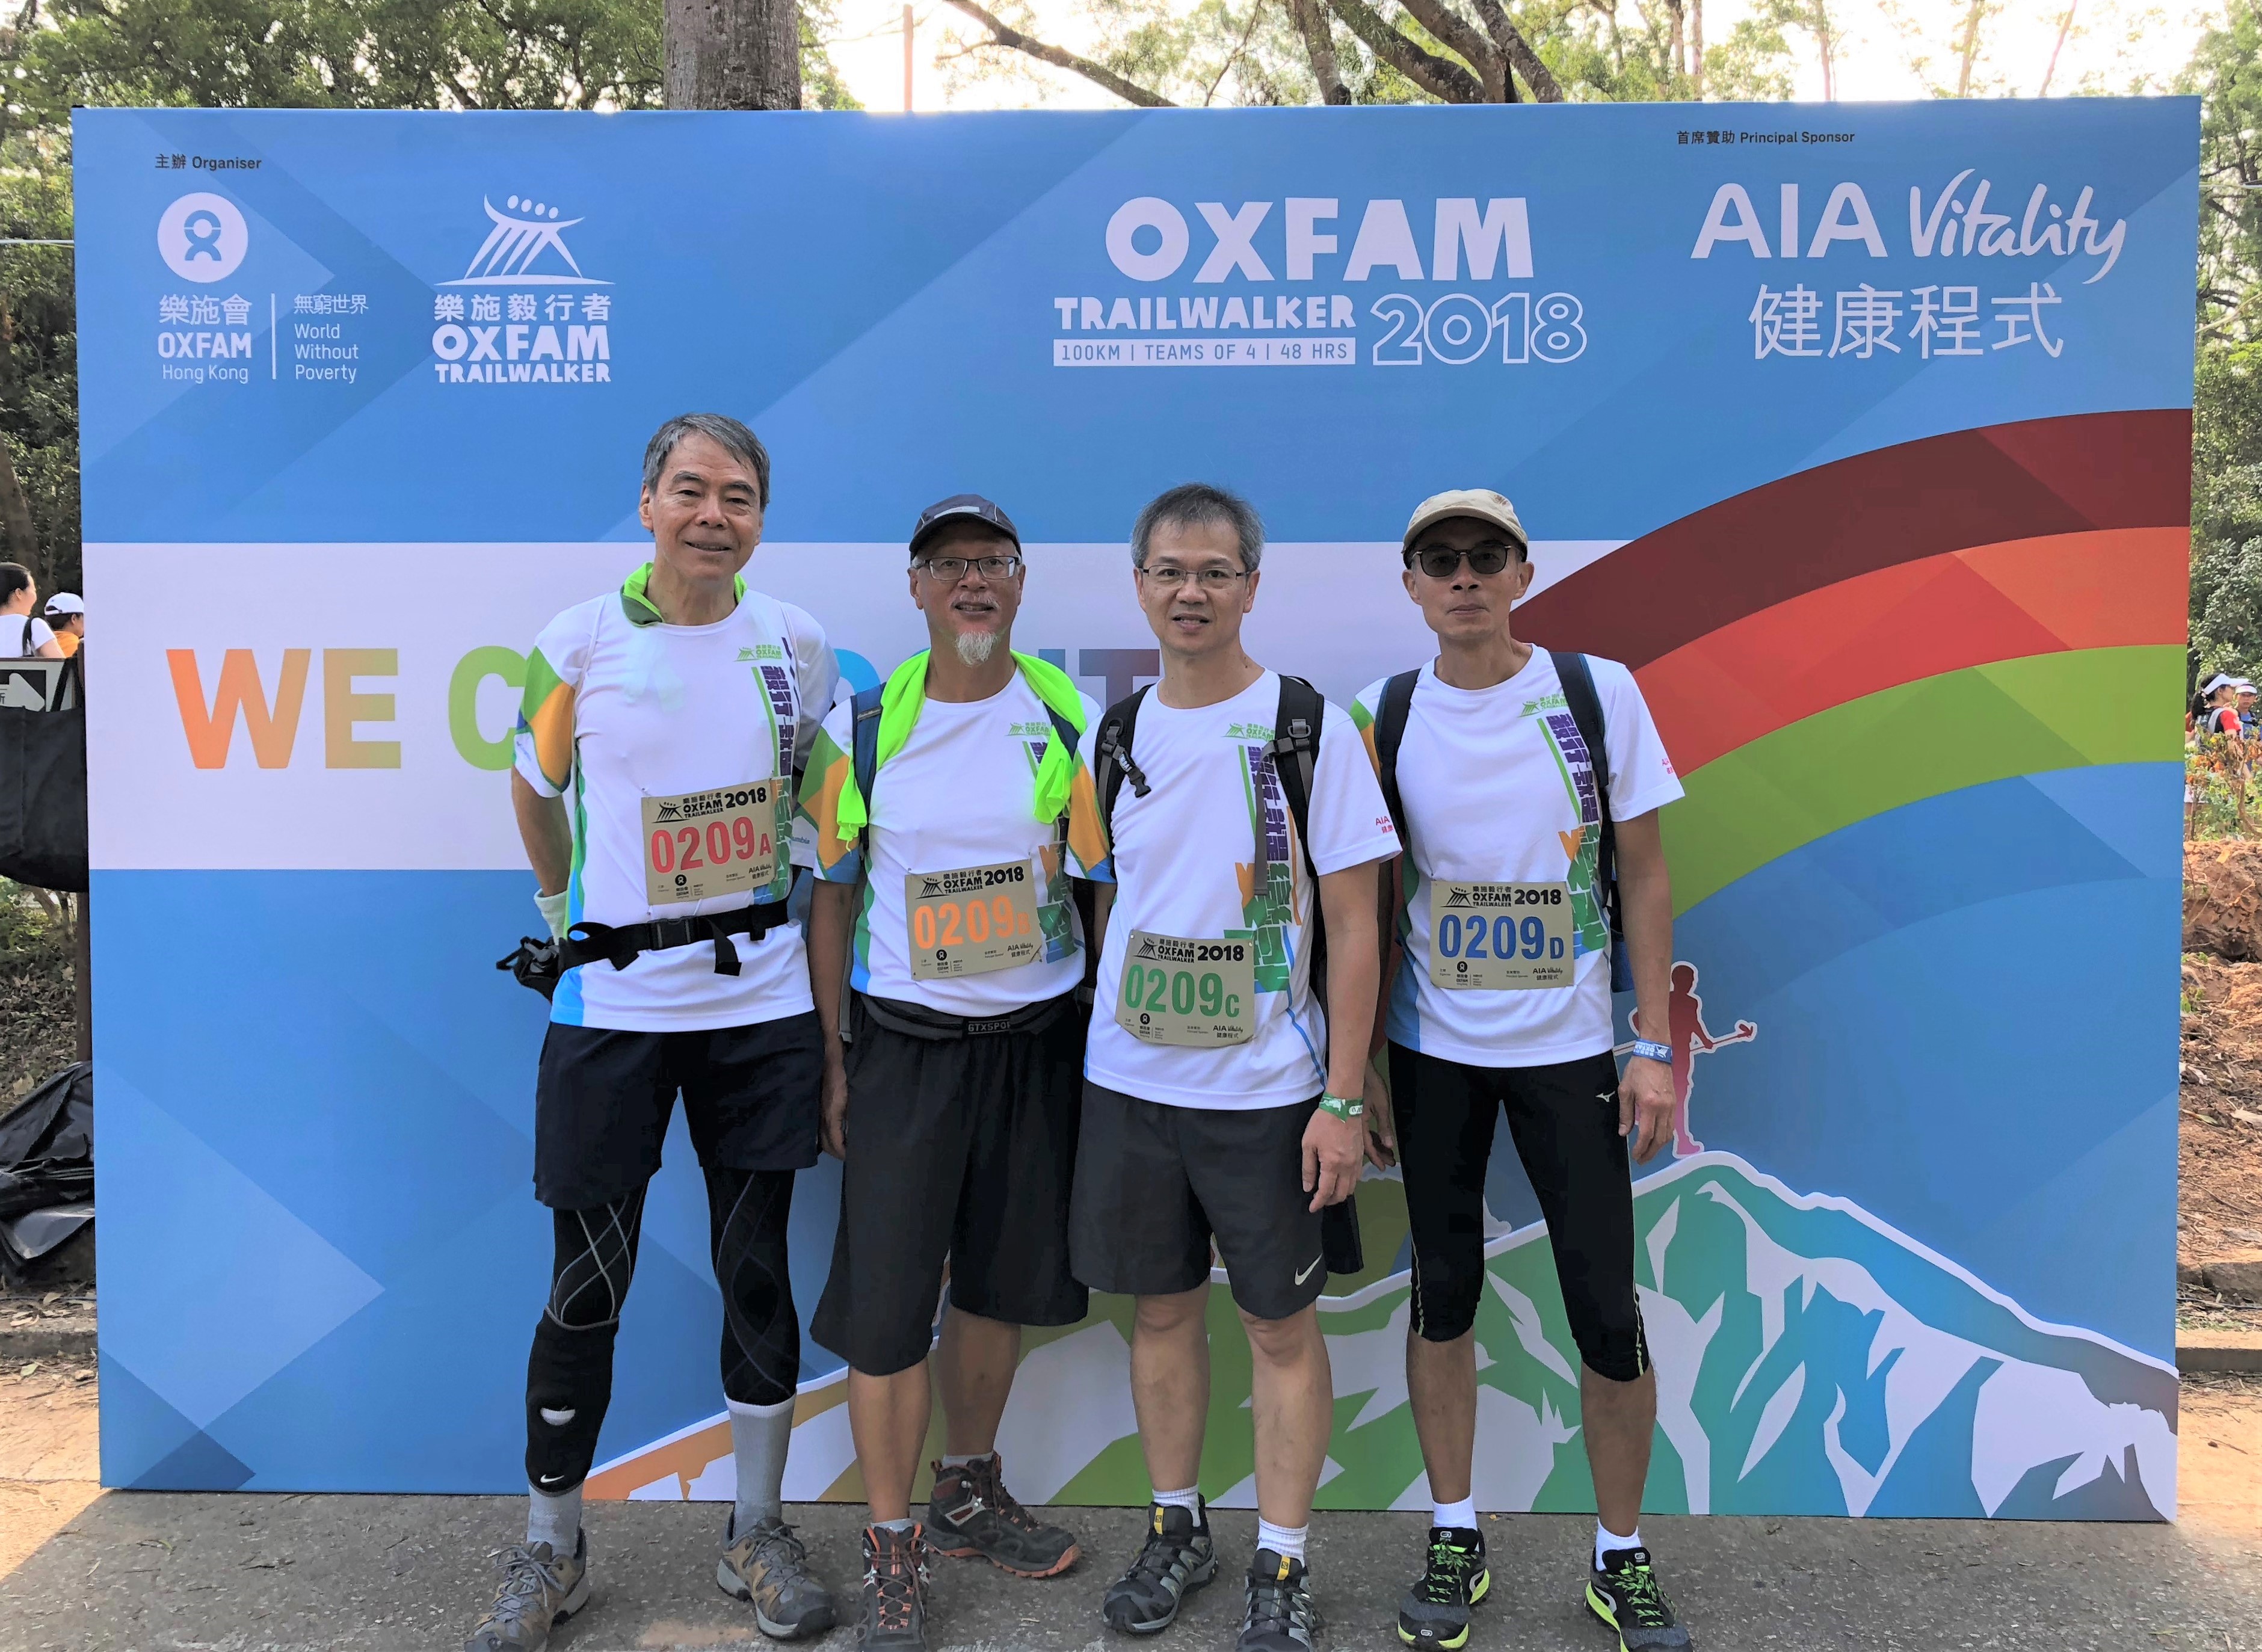 Prof. Lau and his friends participating in Oxfam Trailwalker